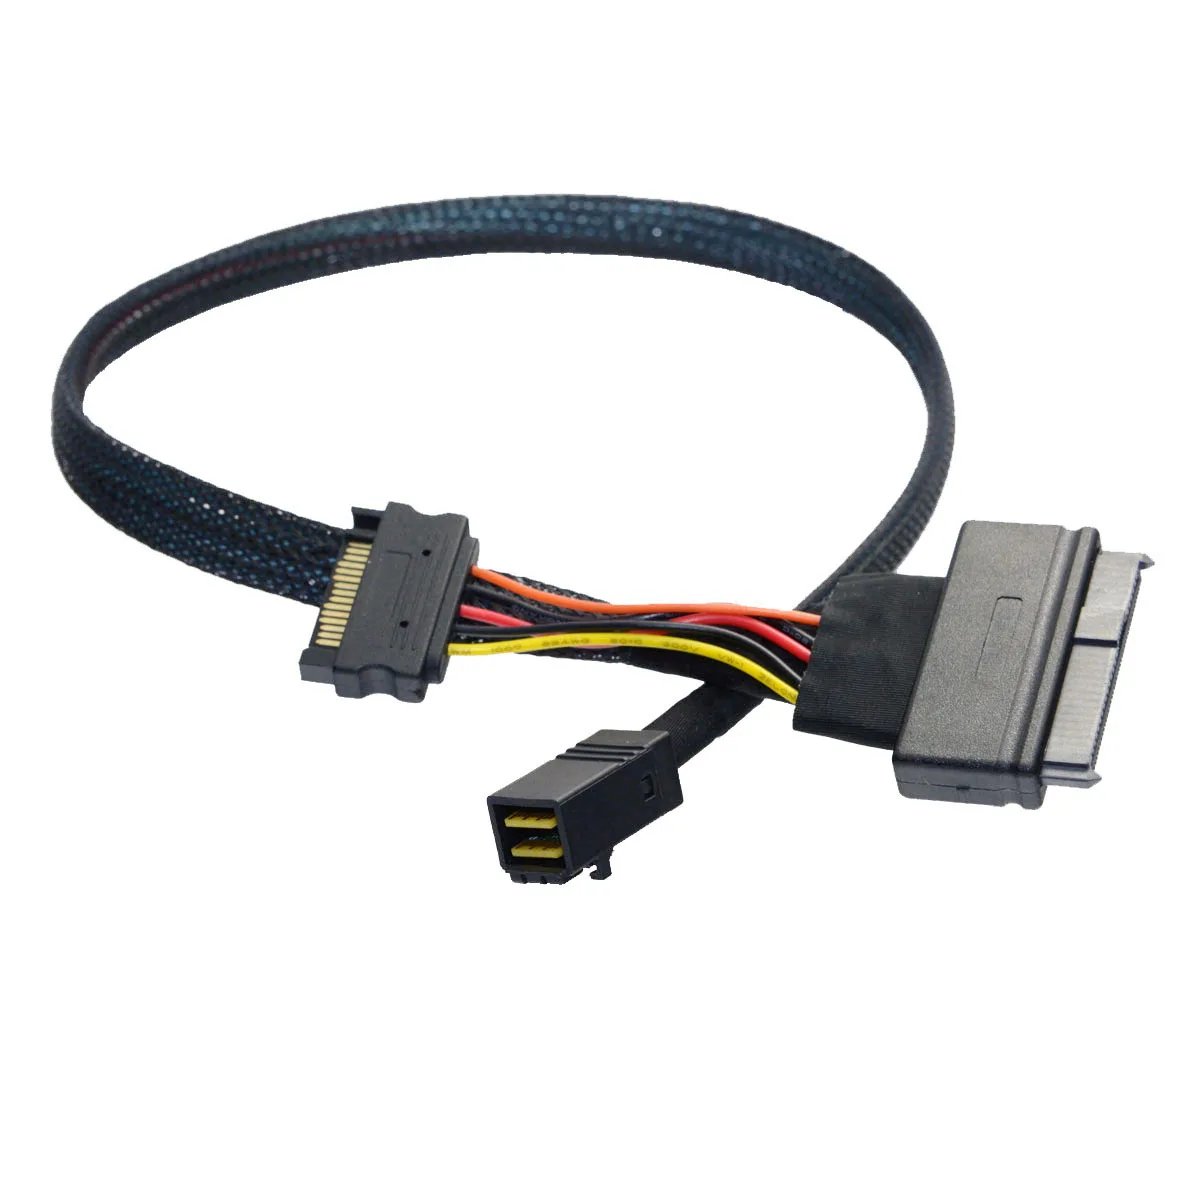 1m 0.5m HD Mini-SAS (SFF-8643) To U.2 SFF-8639 Date Cable For 2.5 NVMe SSDWith 15-Pin SATA Power Suitable For U.2 SSD Mining xiwai u 2 u2 sff 8639 nvme pcie ssd cable for m 2 sff 8643 mini sas hd mainboard intel ssd 750 p3600 p3700